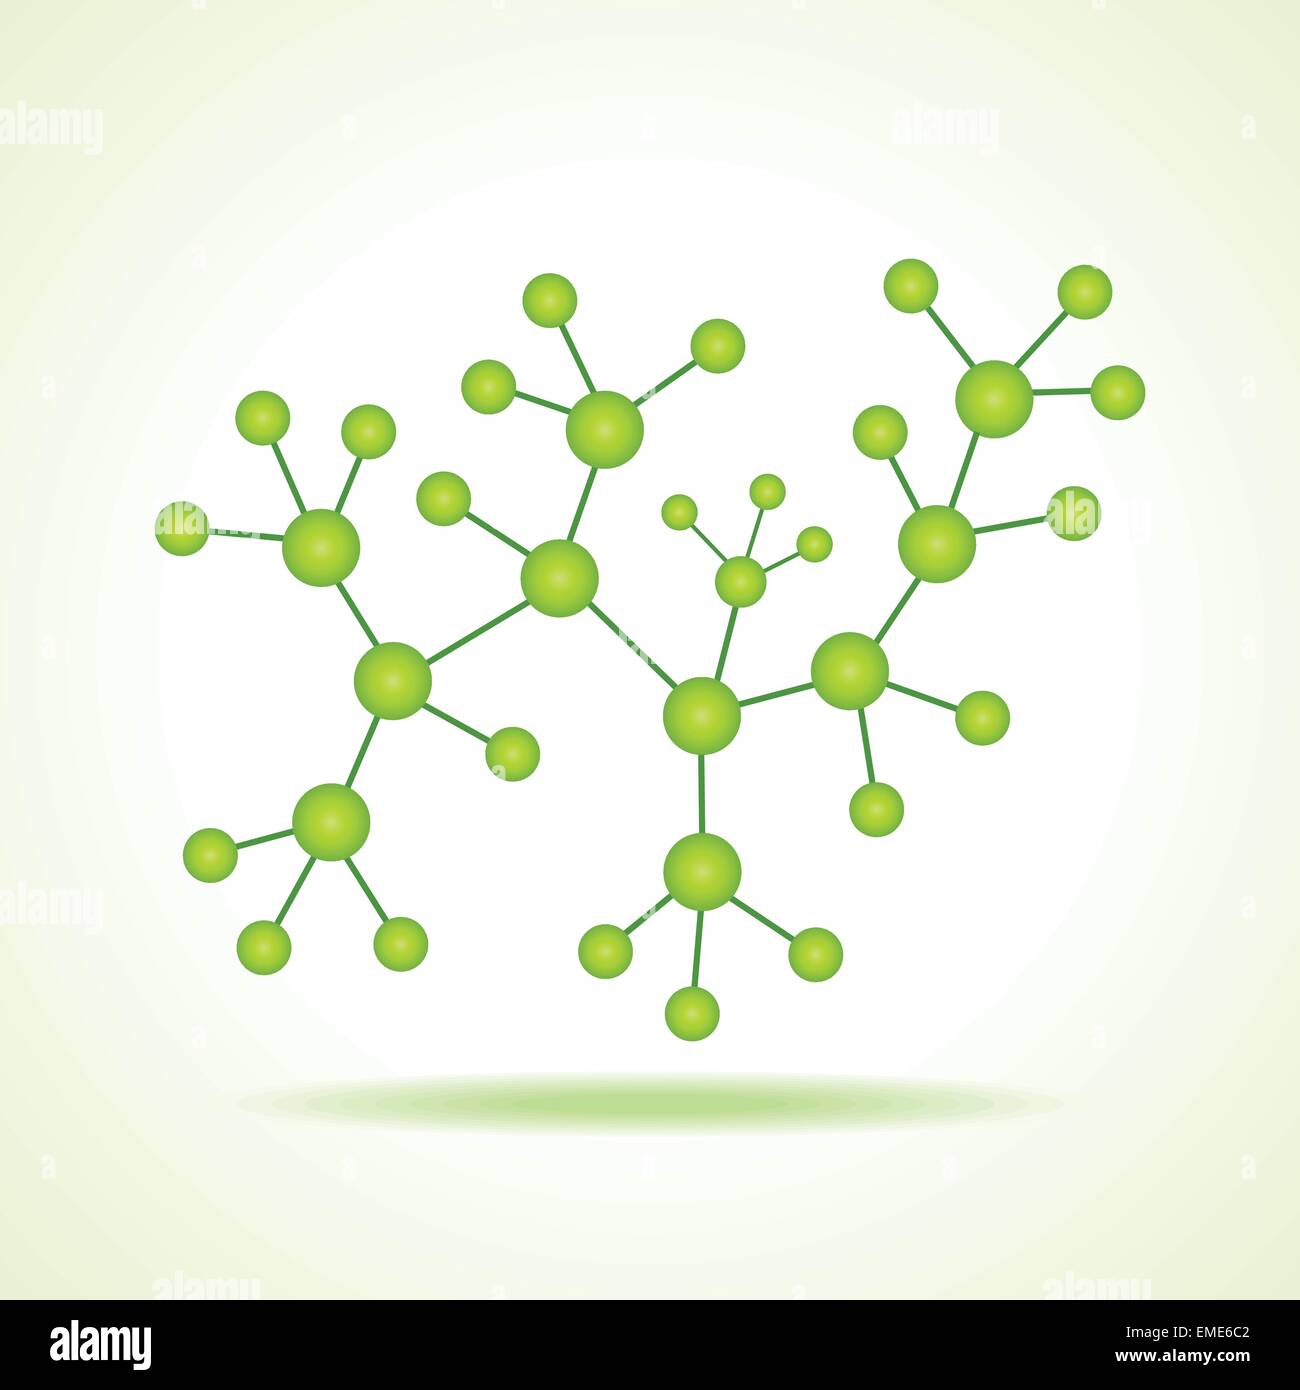 3d eco chemical atomic structure molecule model vector illustration Stock Vector